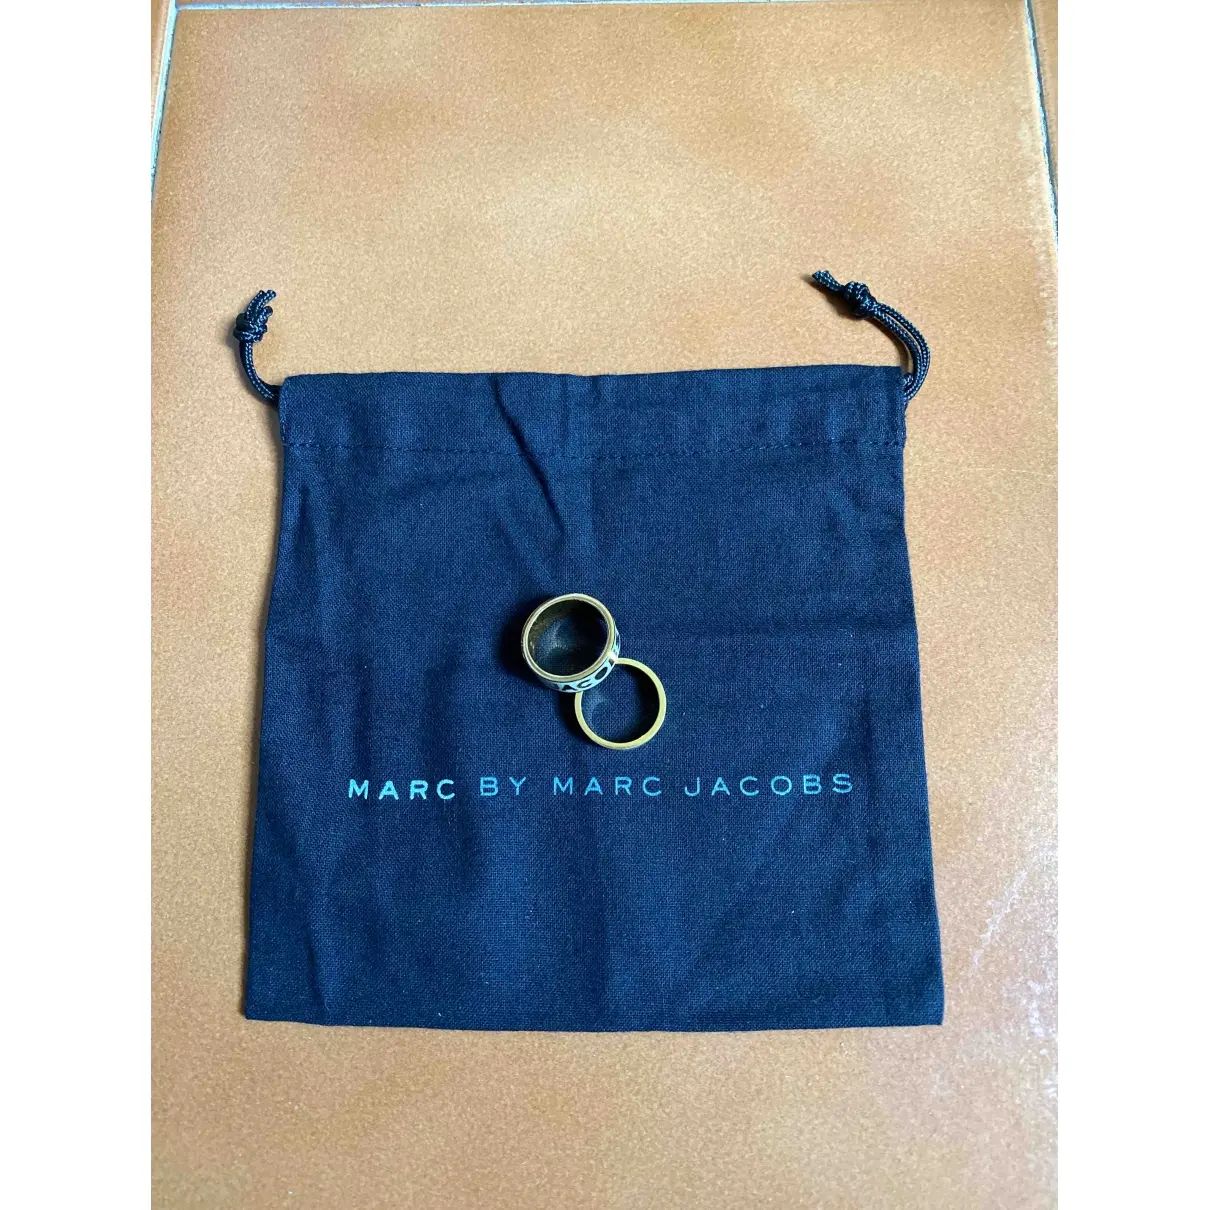 Buy Marc by Marc Jacobs Ring online